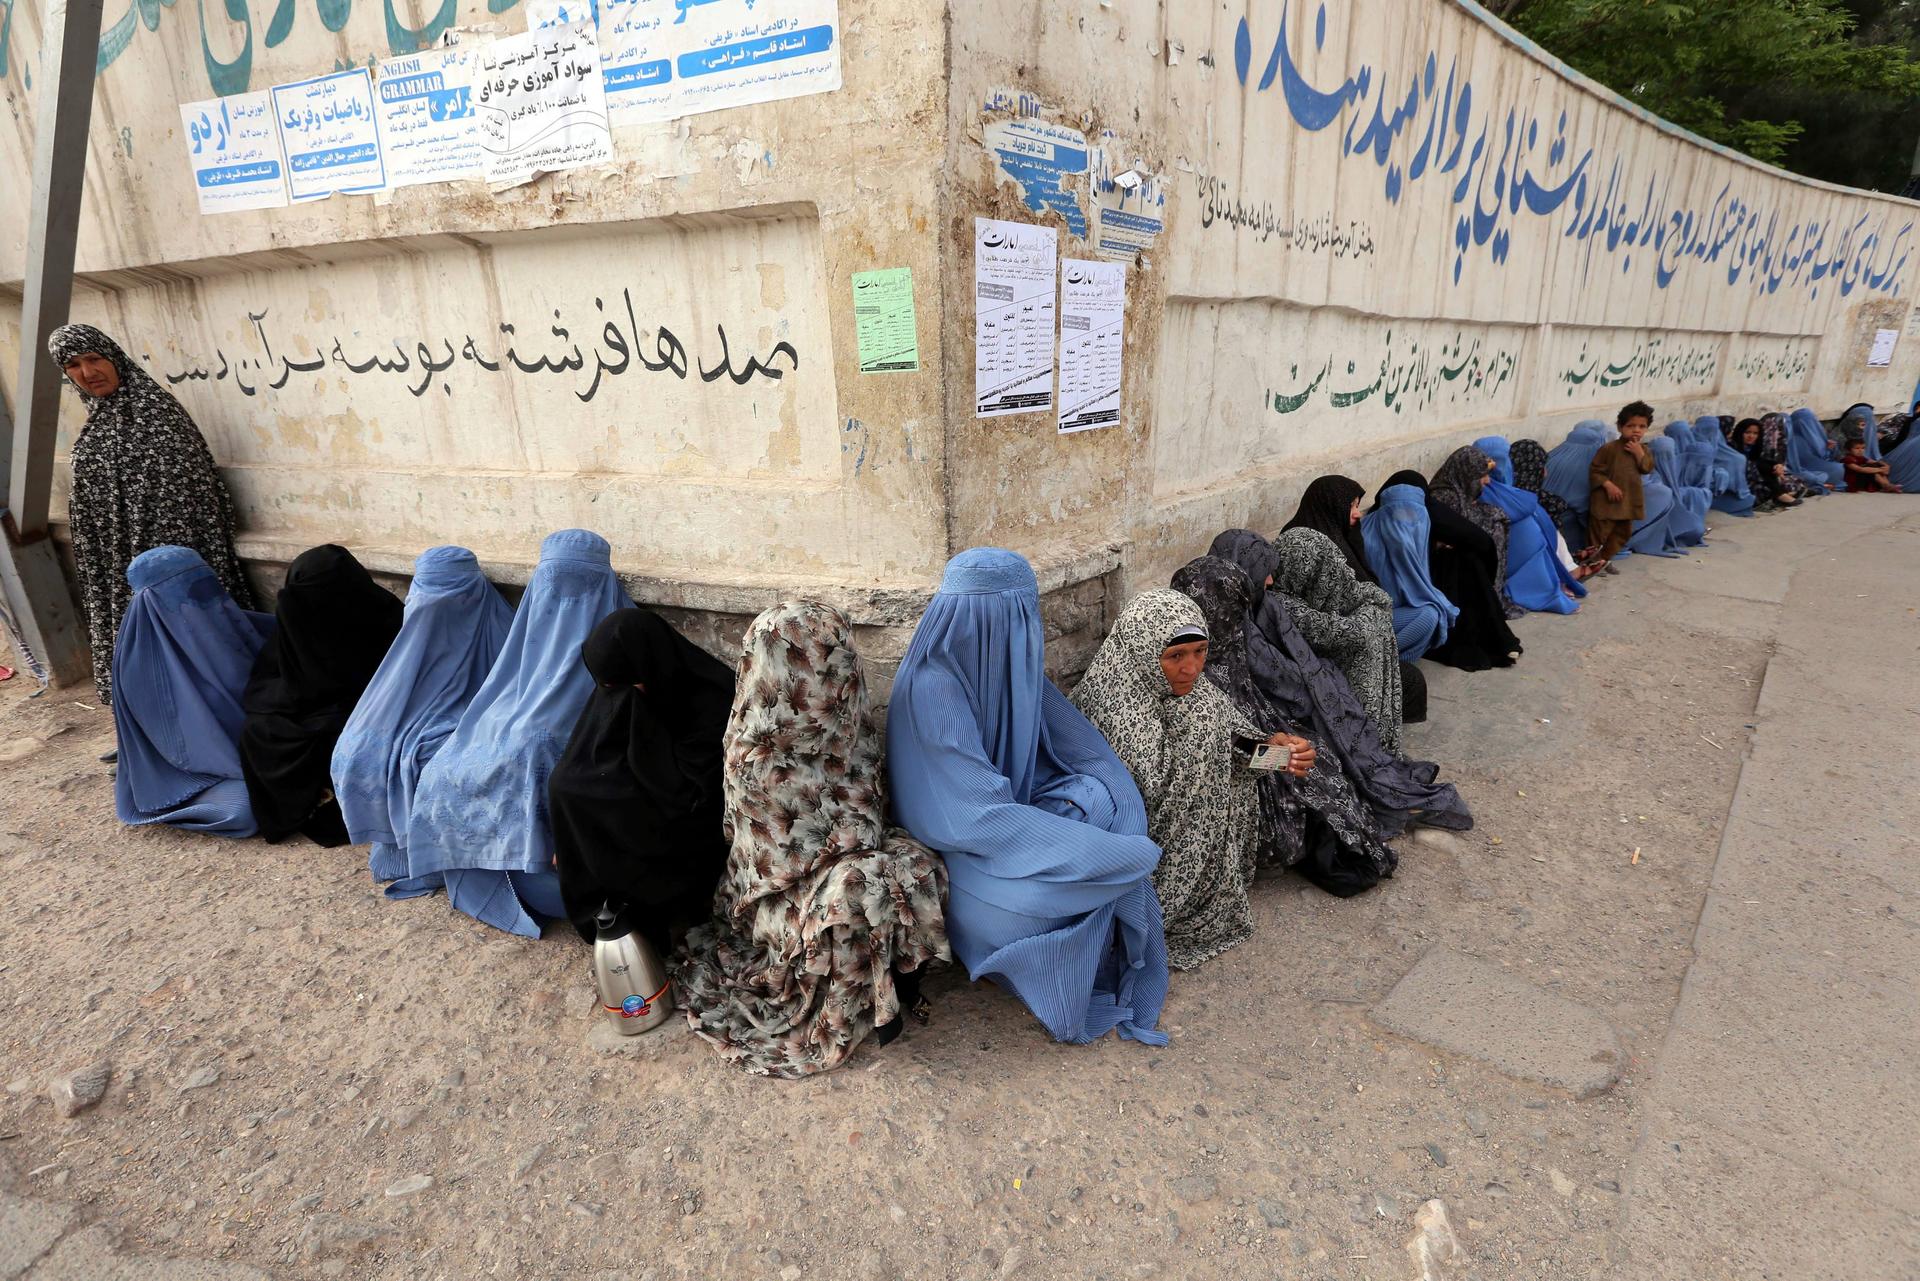 Burqa-clad women line up to vote during the presidential election run-off to replace Hamid Karzai in Afghanistan where Islamists want to curtail freedoms women have enjoyed for less than a generation. Photo: EPA